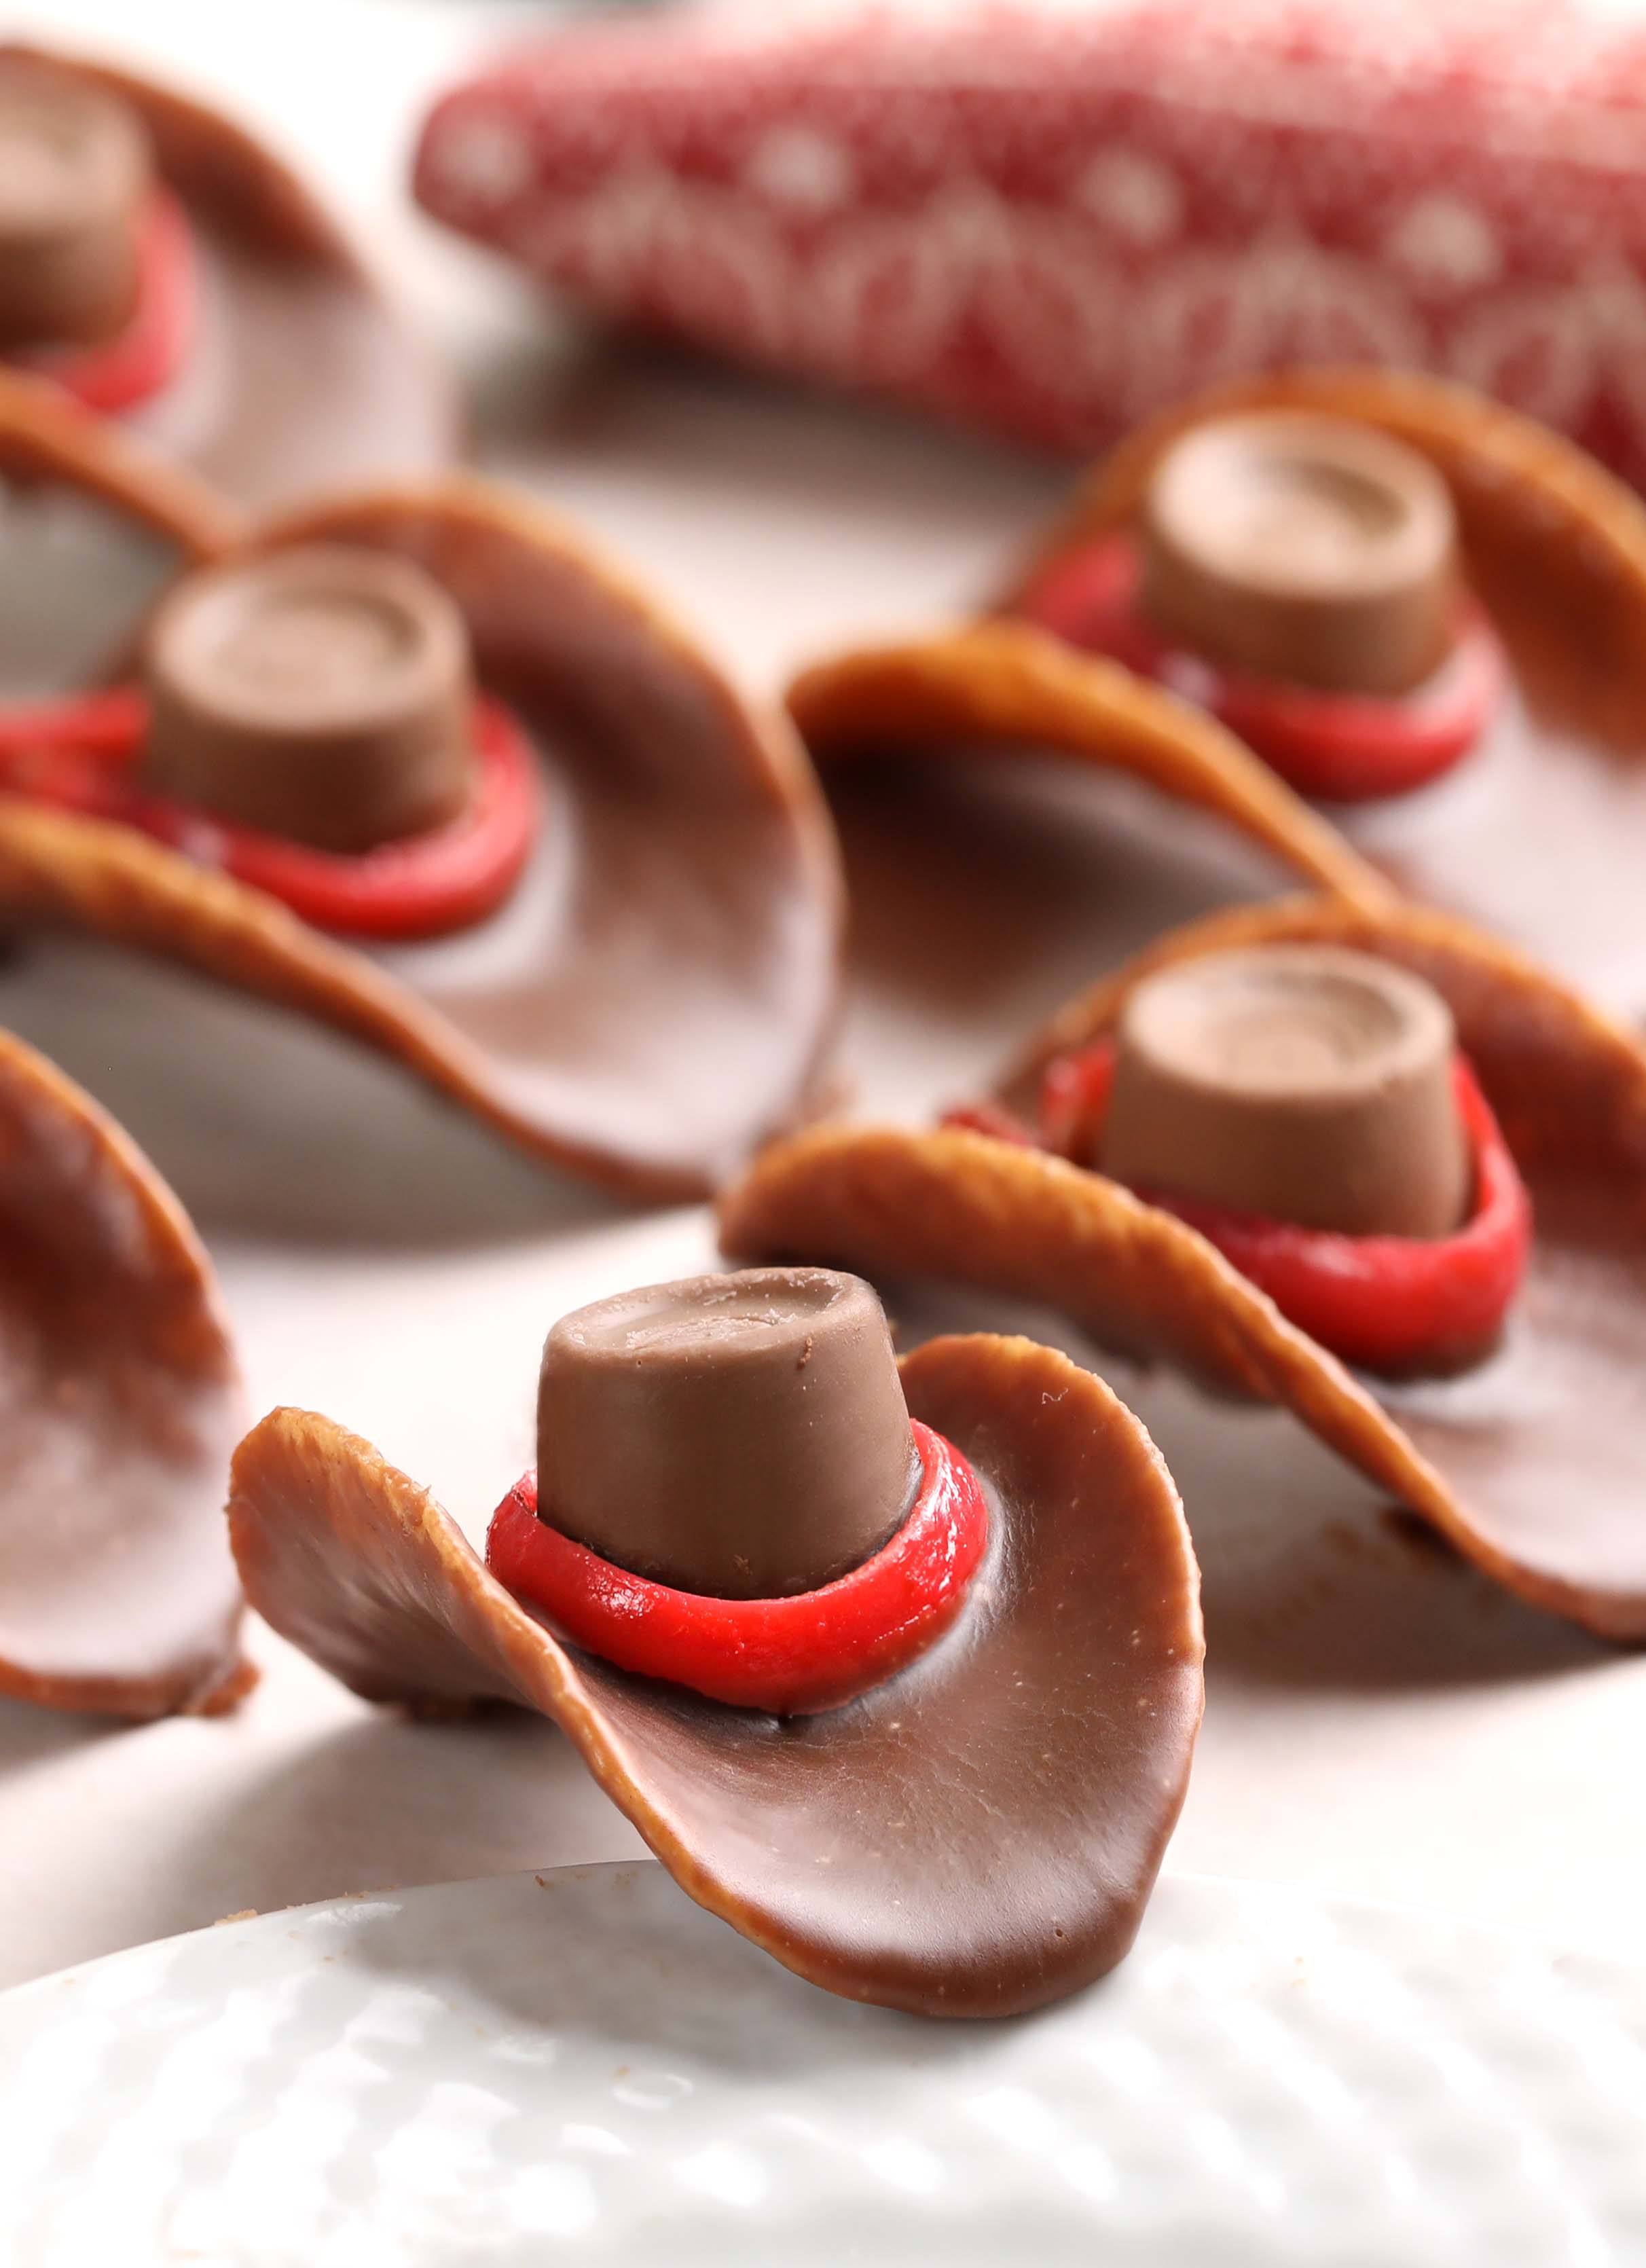 Calling all chocolate-lovers and cowboy fans! CHOCOLATE ROLO COWBOY HATS...Pringles, dipped in chocolate, a Rolo, and licorice. So cute and a unique summer treat to make with kids and the whole family.